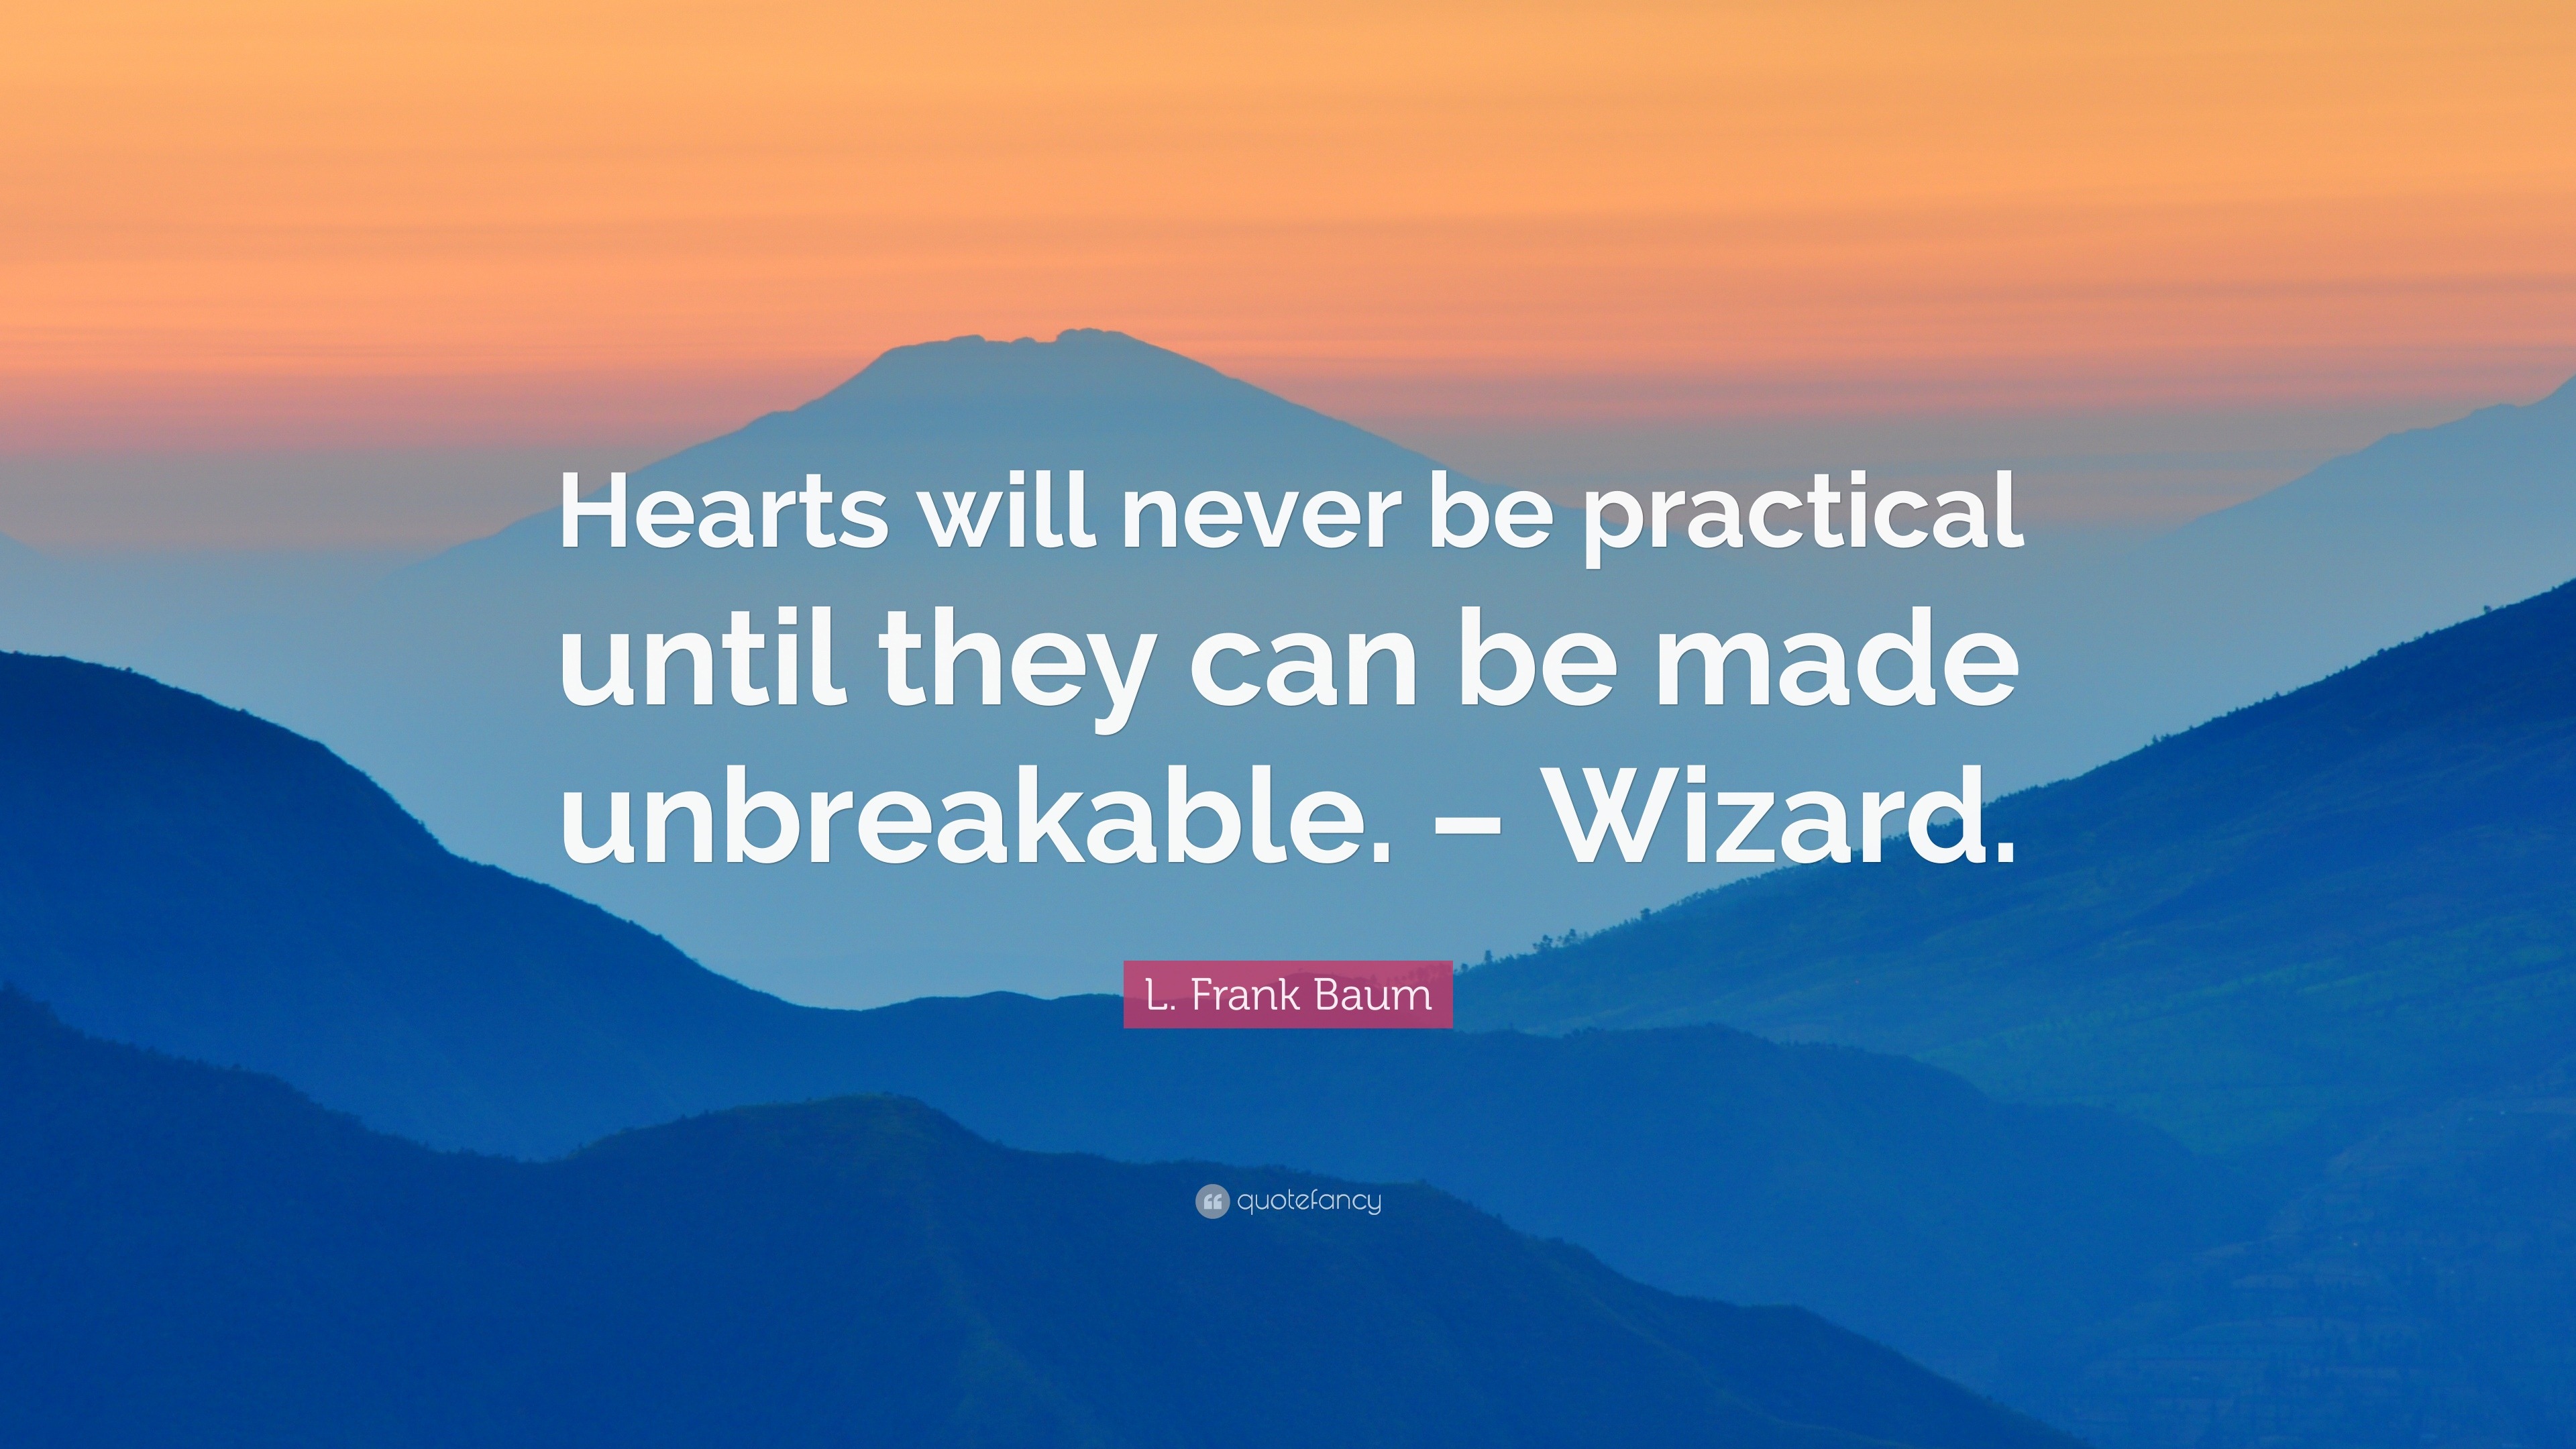 L. Frank Baum Quote: “Hearts will never be practical until they can be